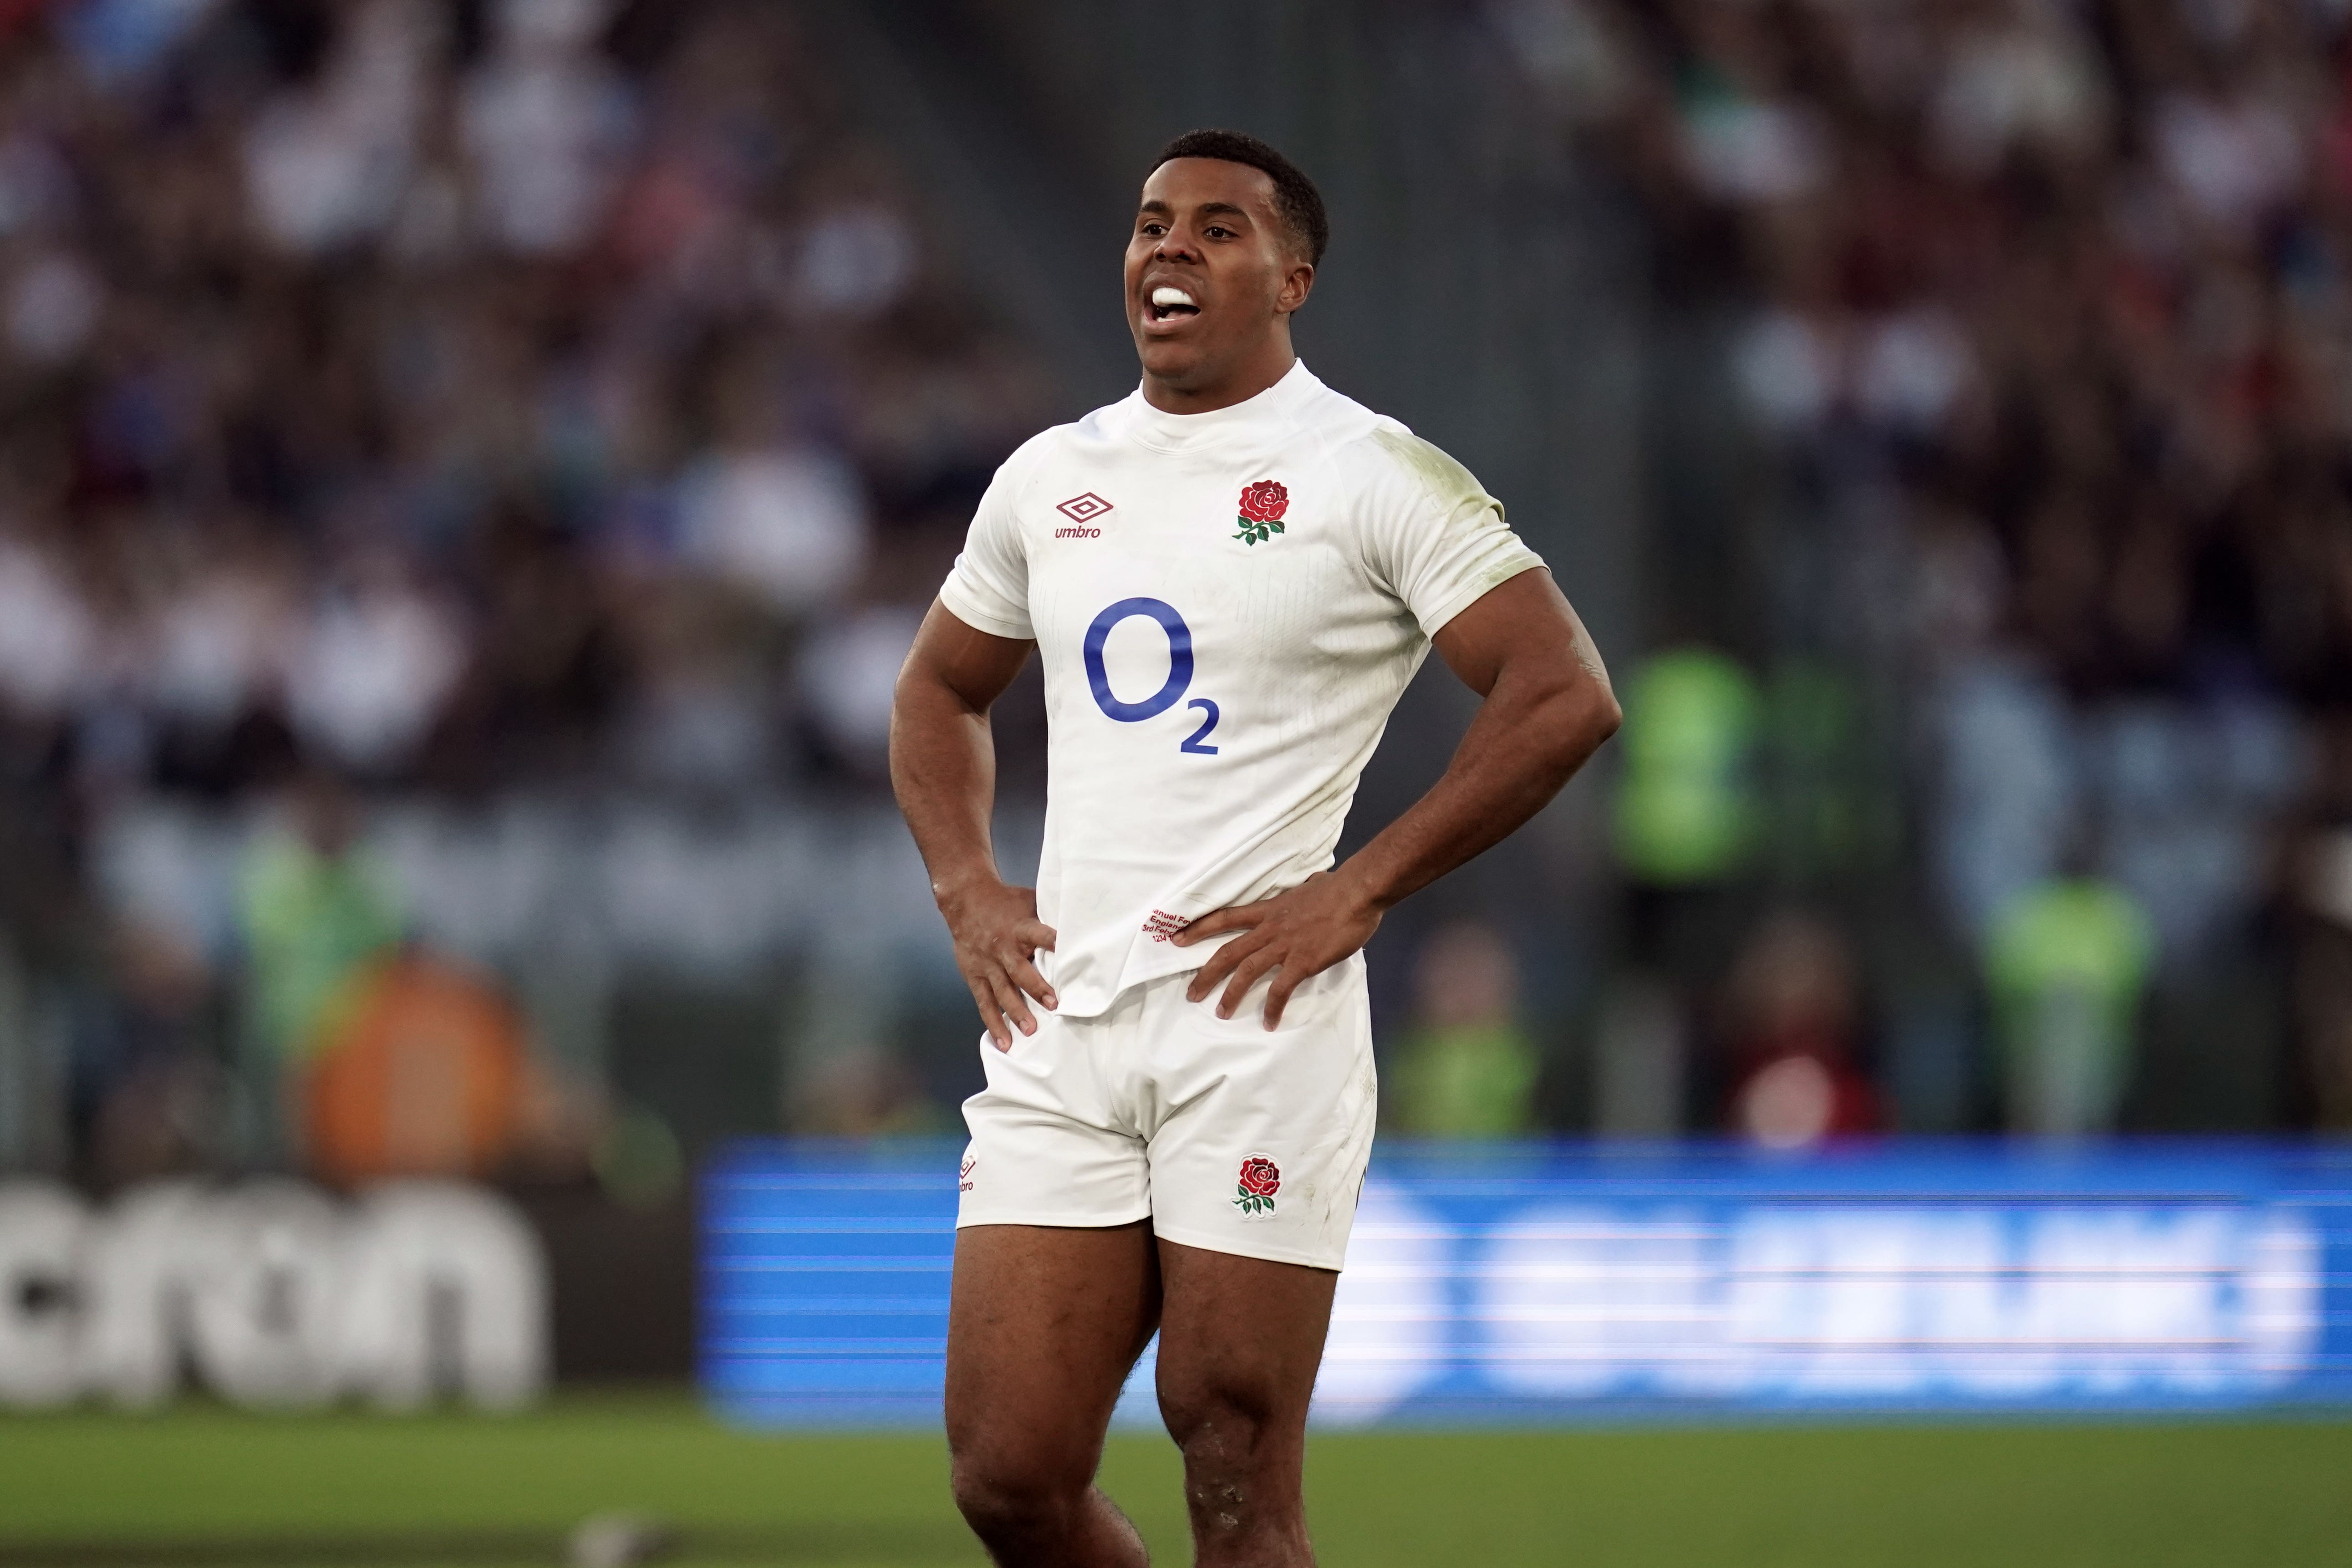 Immanuel Feyi-Waboso made his England debut against Italy